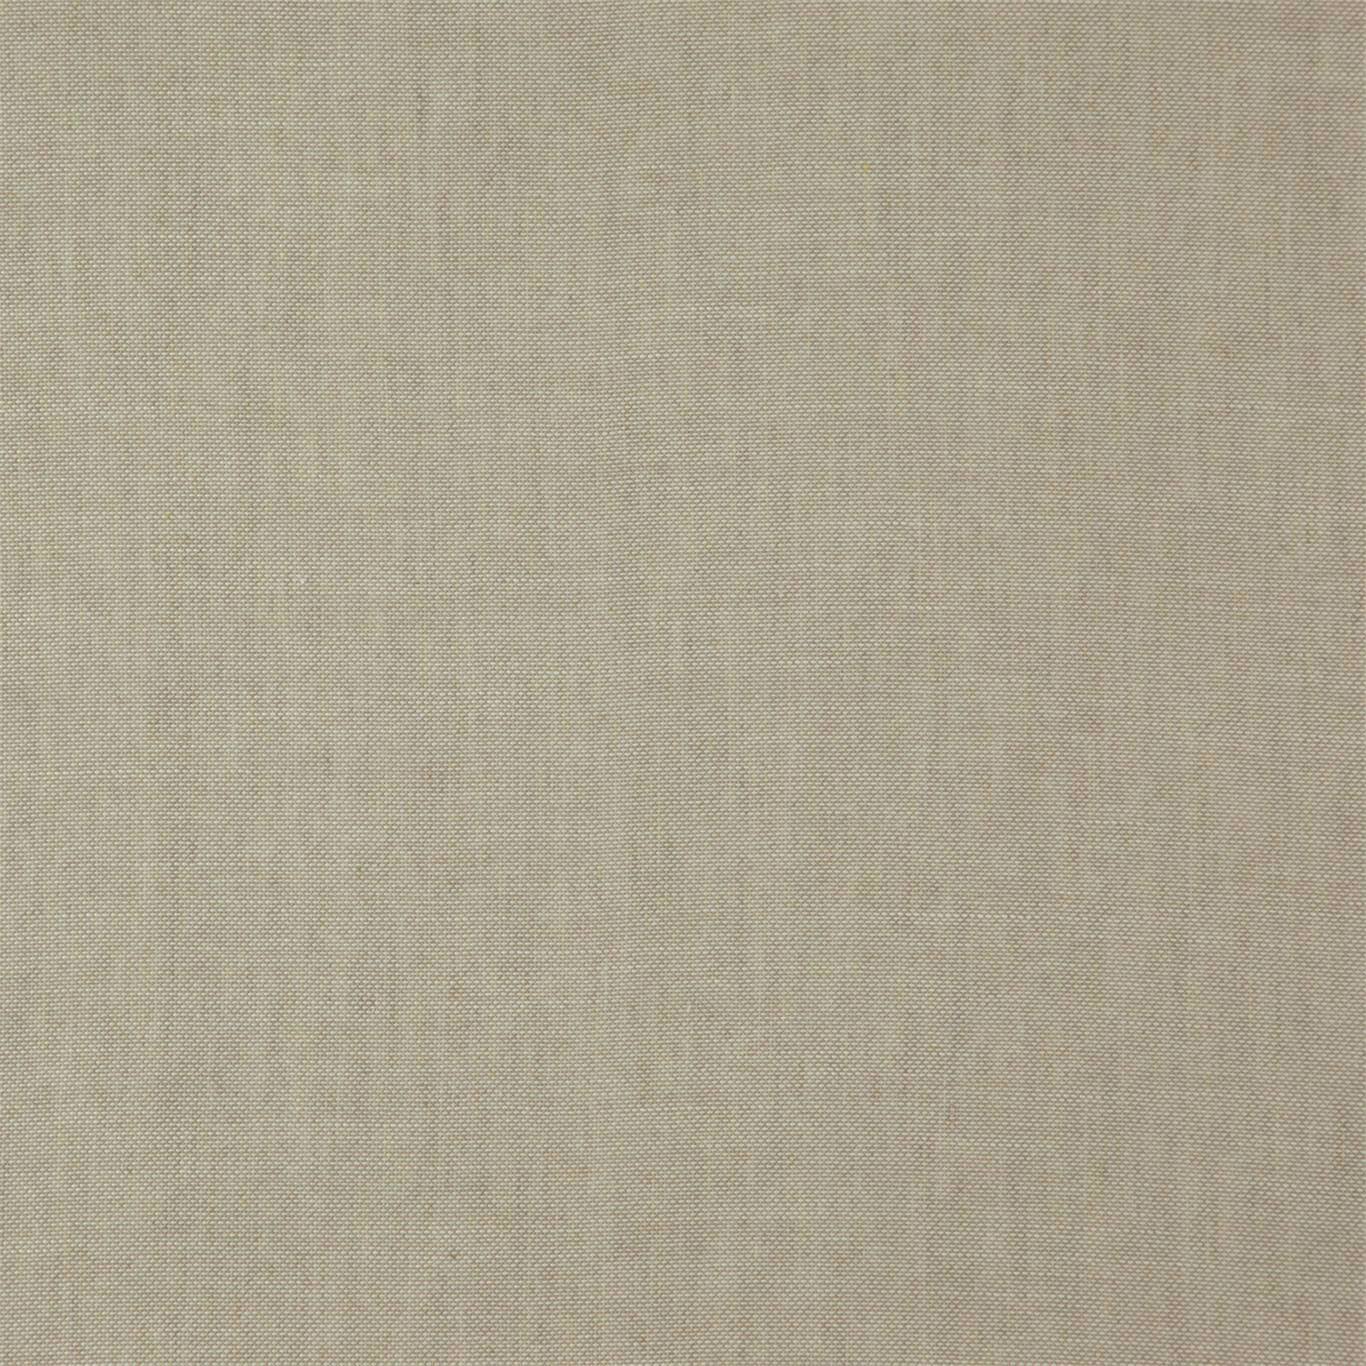 Chance Fabric by Harlequin - HHAR143064 - Linen